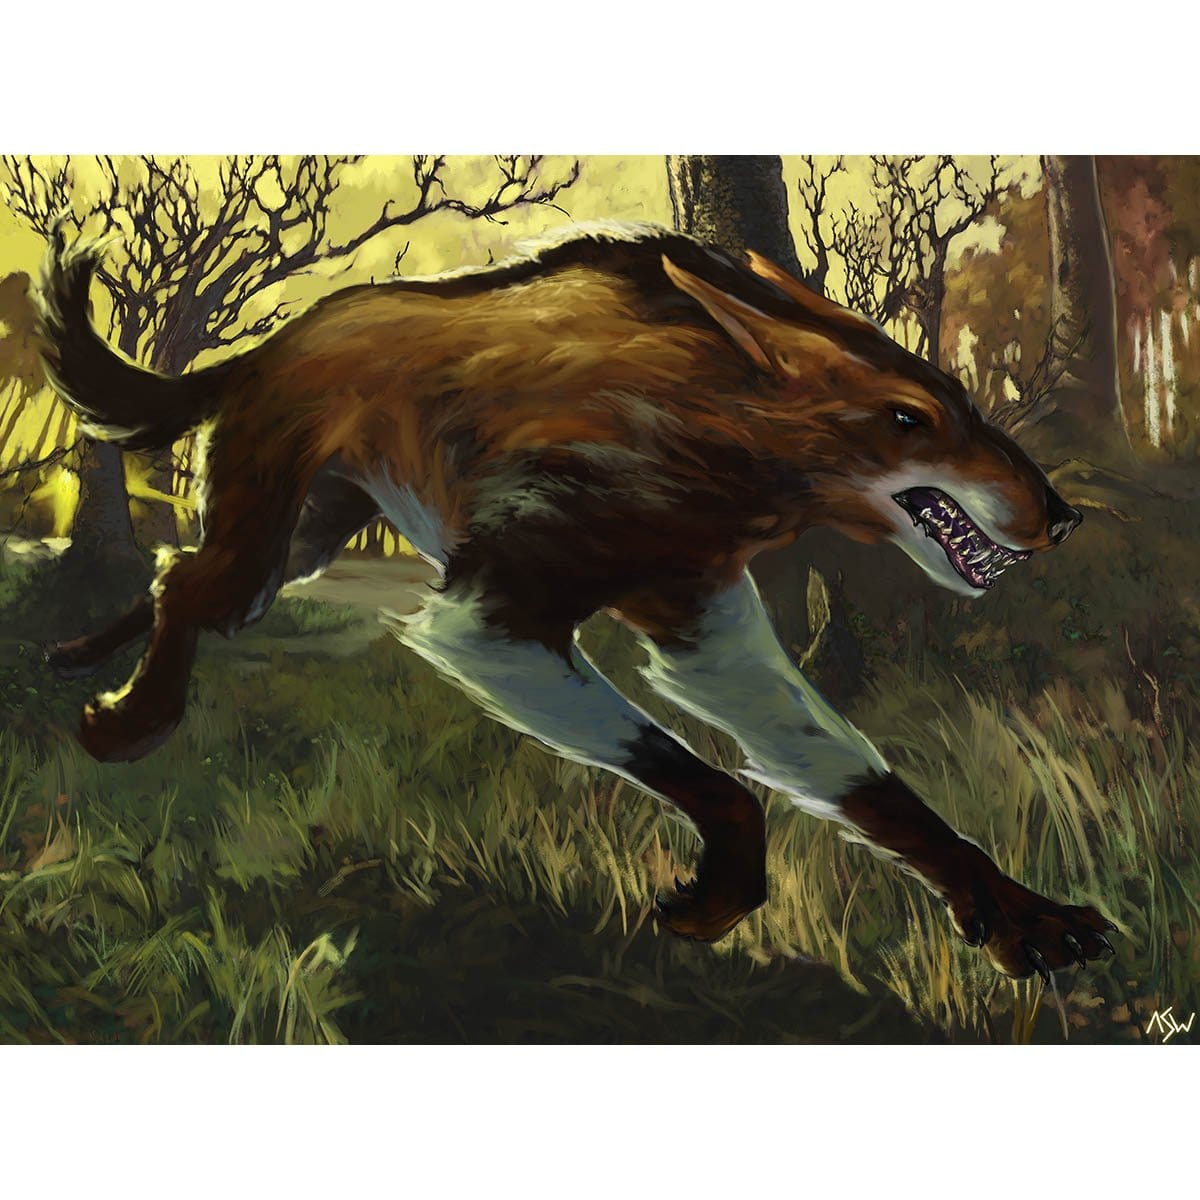 Wild Mongrel Print - Print - Original Magic Art - Accessories for Magic the Gathering and other card games